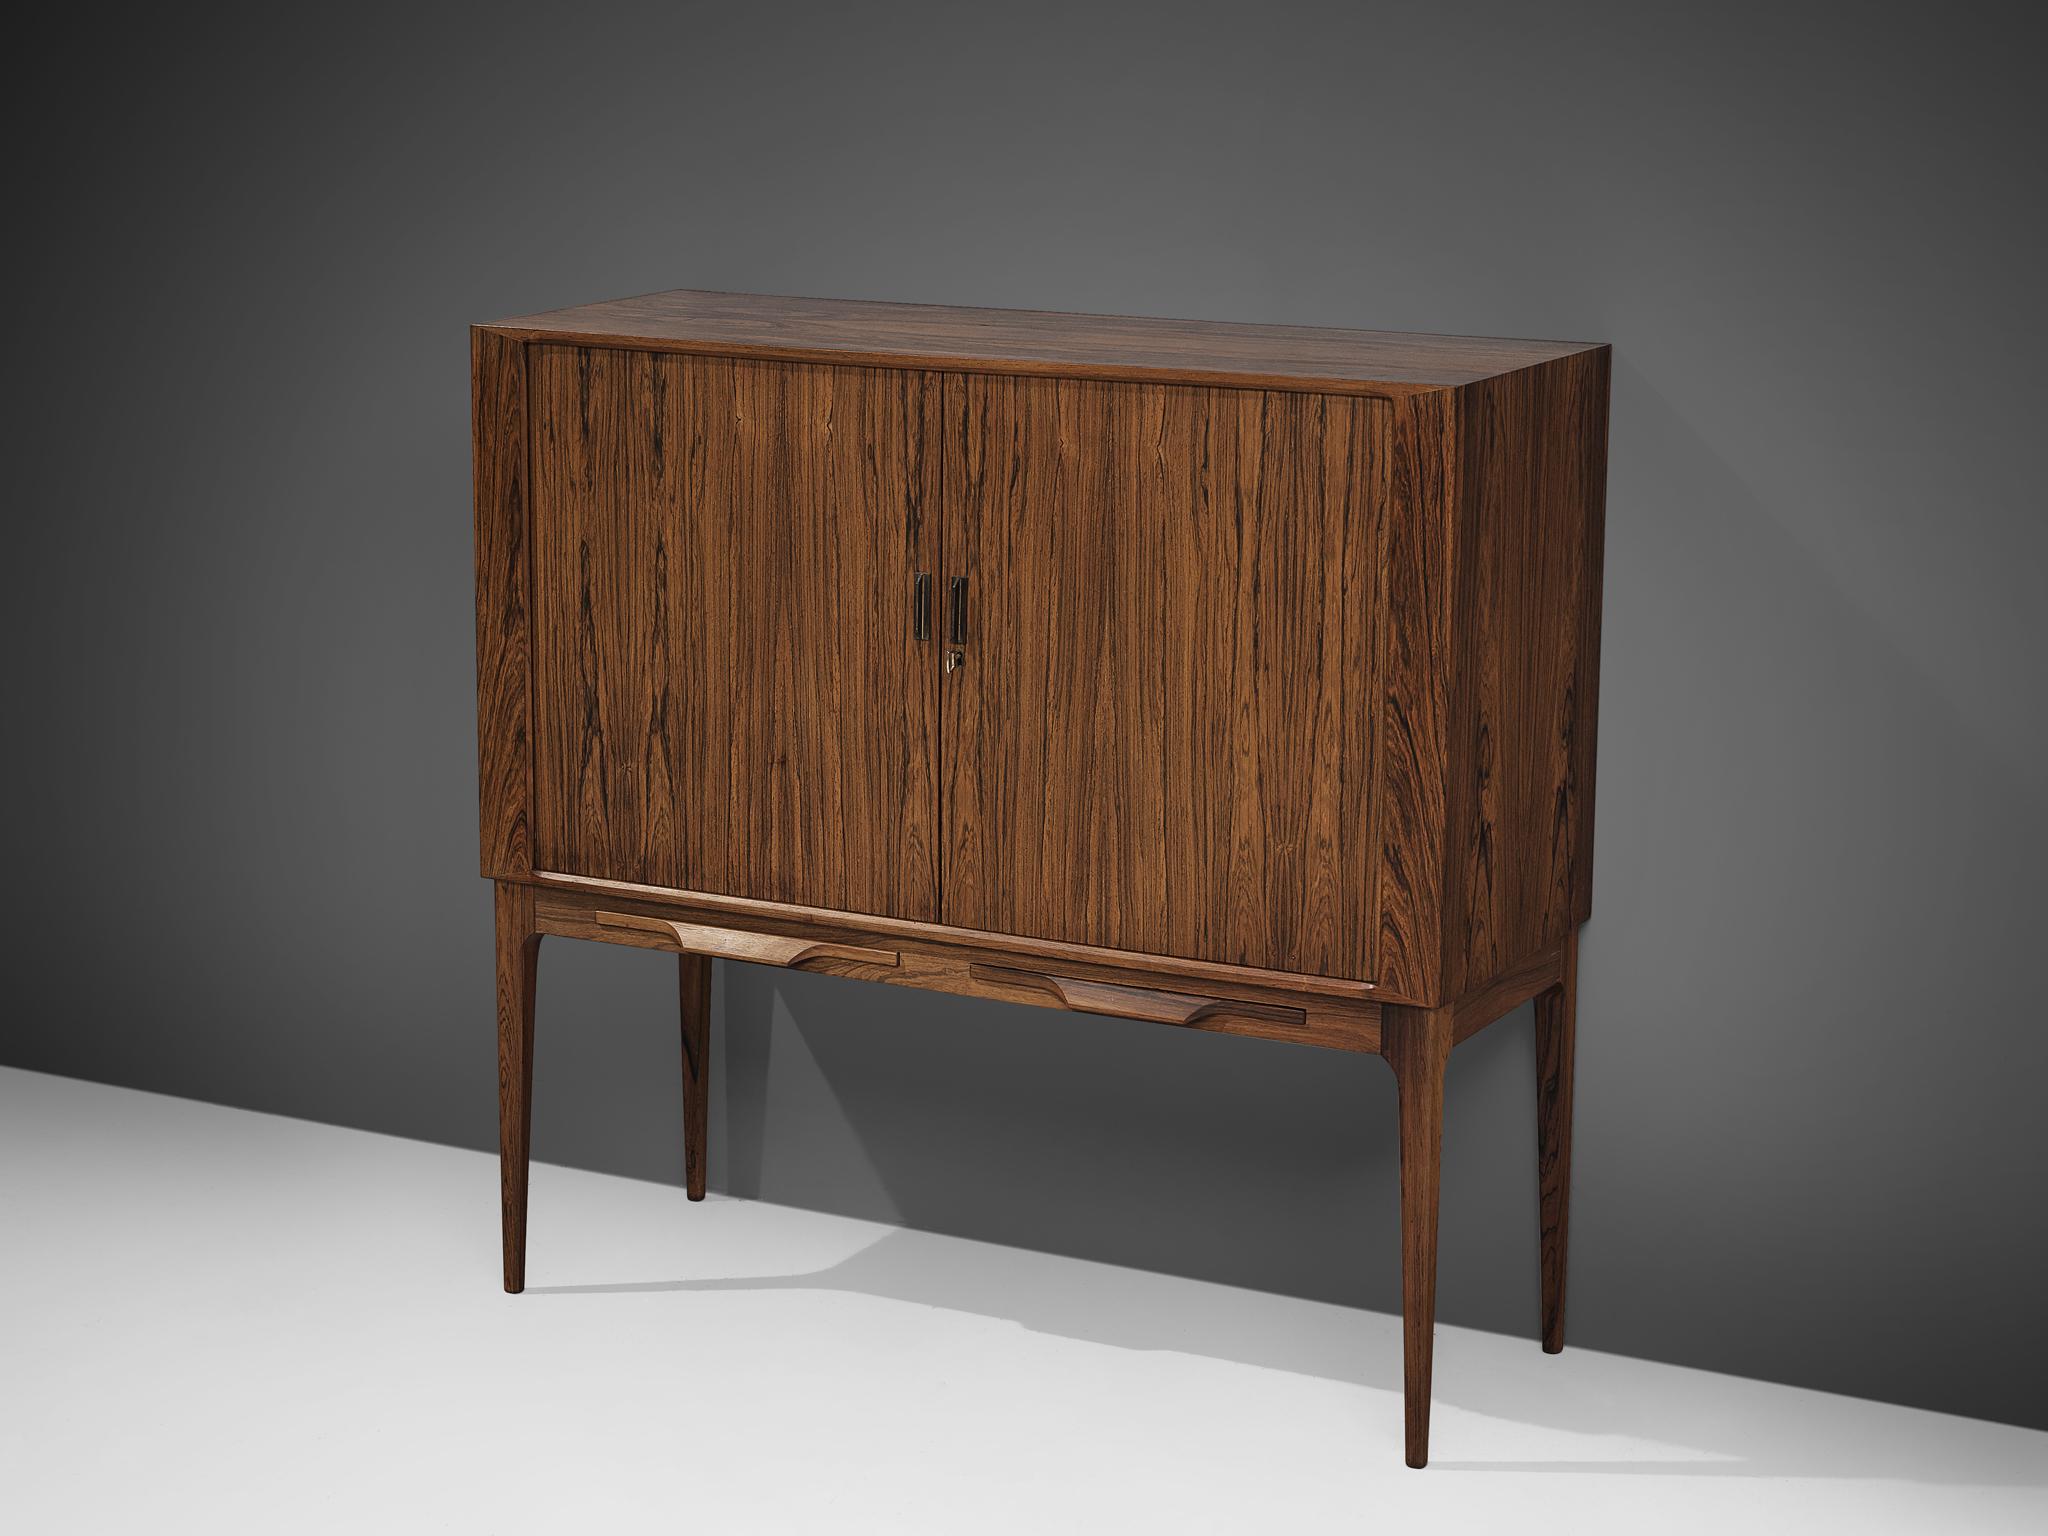 Bar cabinet by Illum Wikkelsø for C.F. Christensen, rosewood, brass, glass, mirror, Denmark, 1960s.

This elegant high-legged cabinet is designed by Illum Wikkelsø and produced by C. F. Christensen, Silkeborg. The dry bar features cabinet two doors